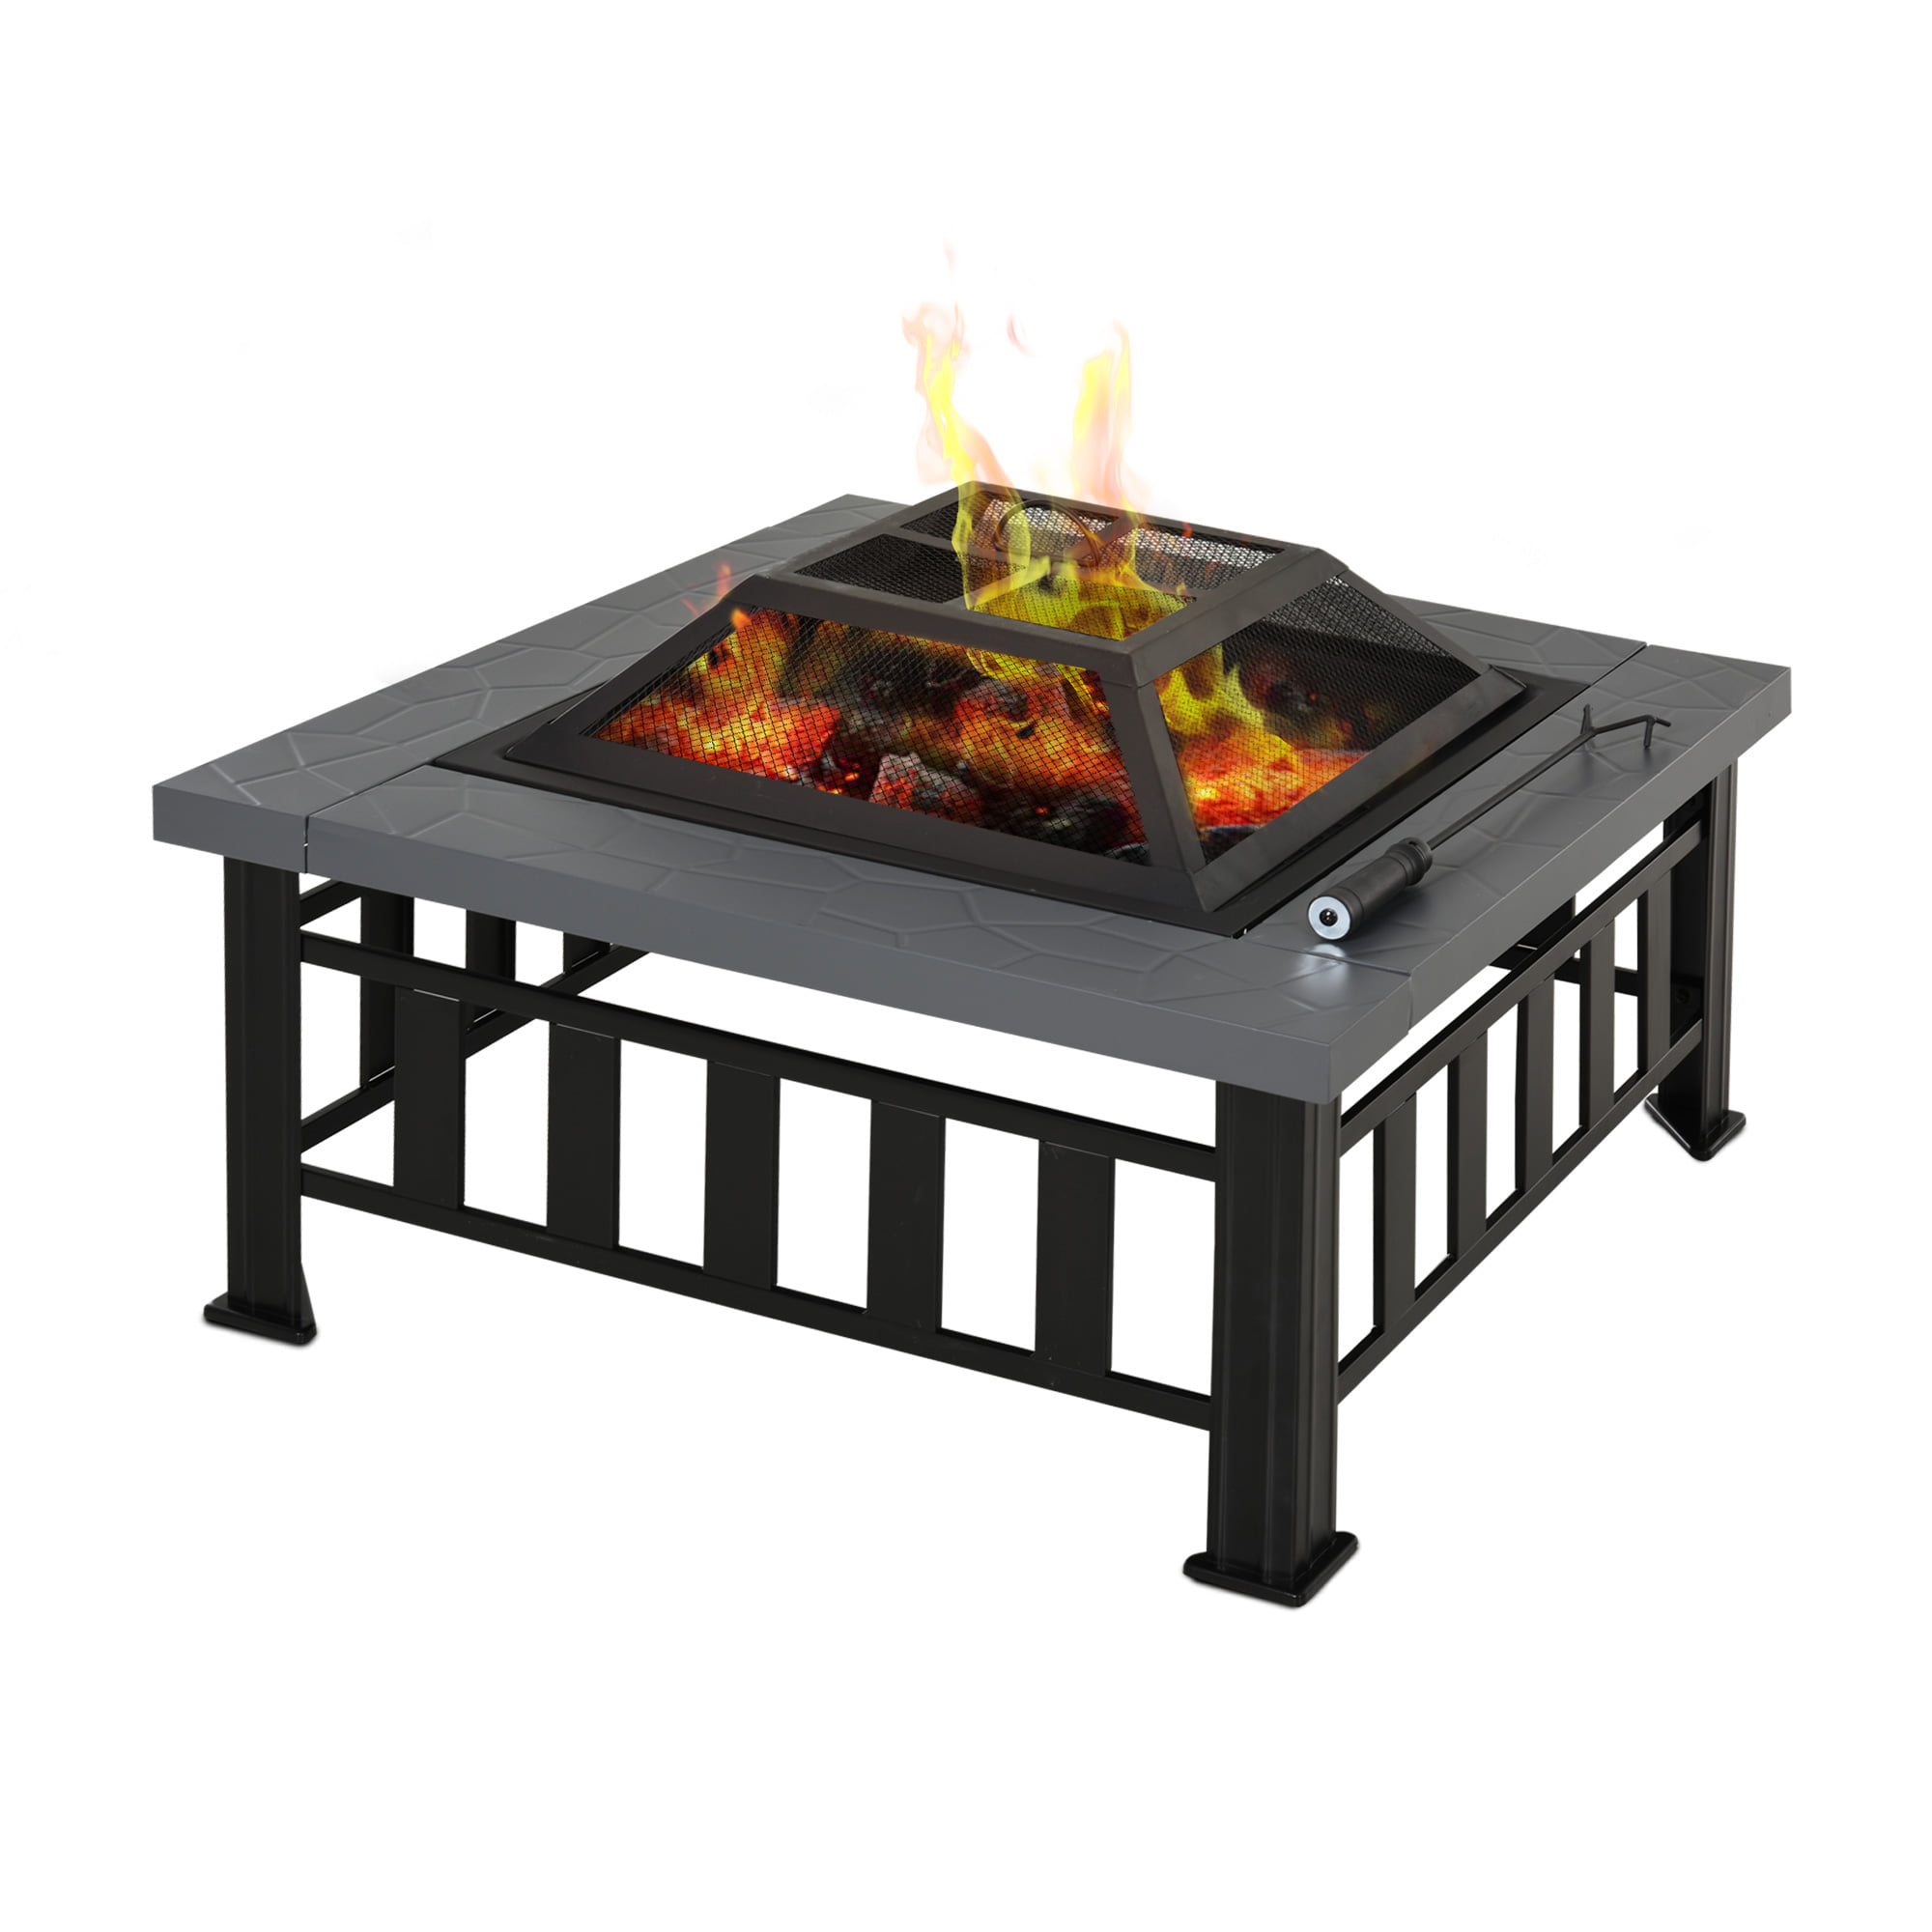 Outsunny 32 Steel Square Outdoor Patio Wood Burning Fire Pit Table Top Set Walmart Com